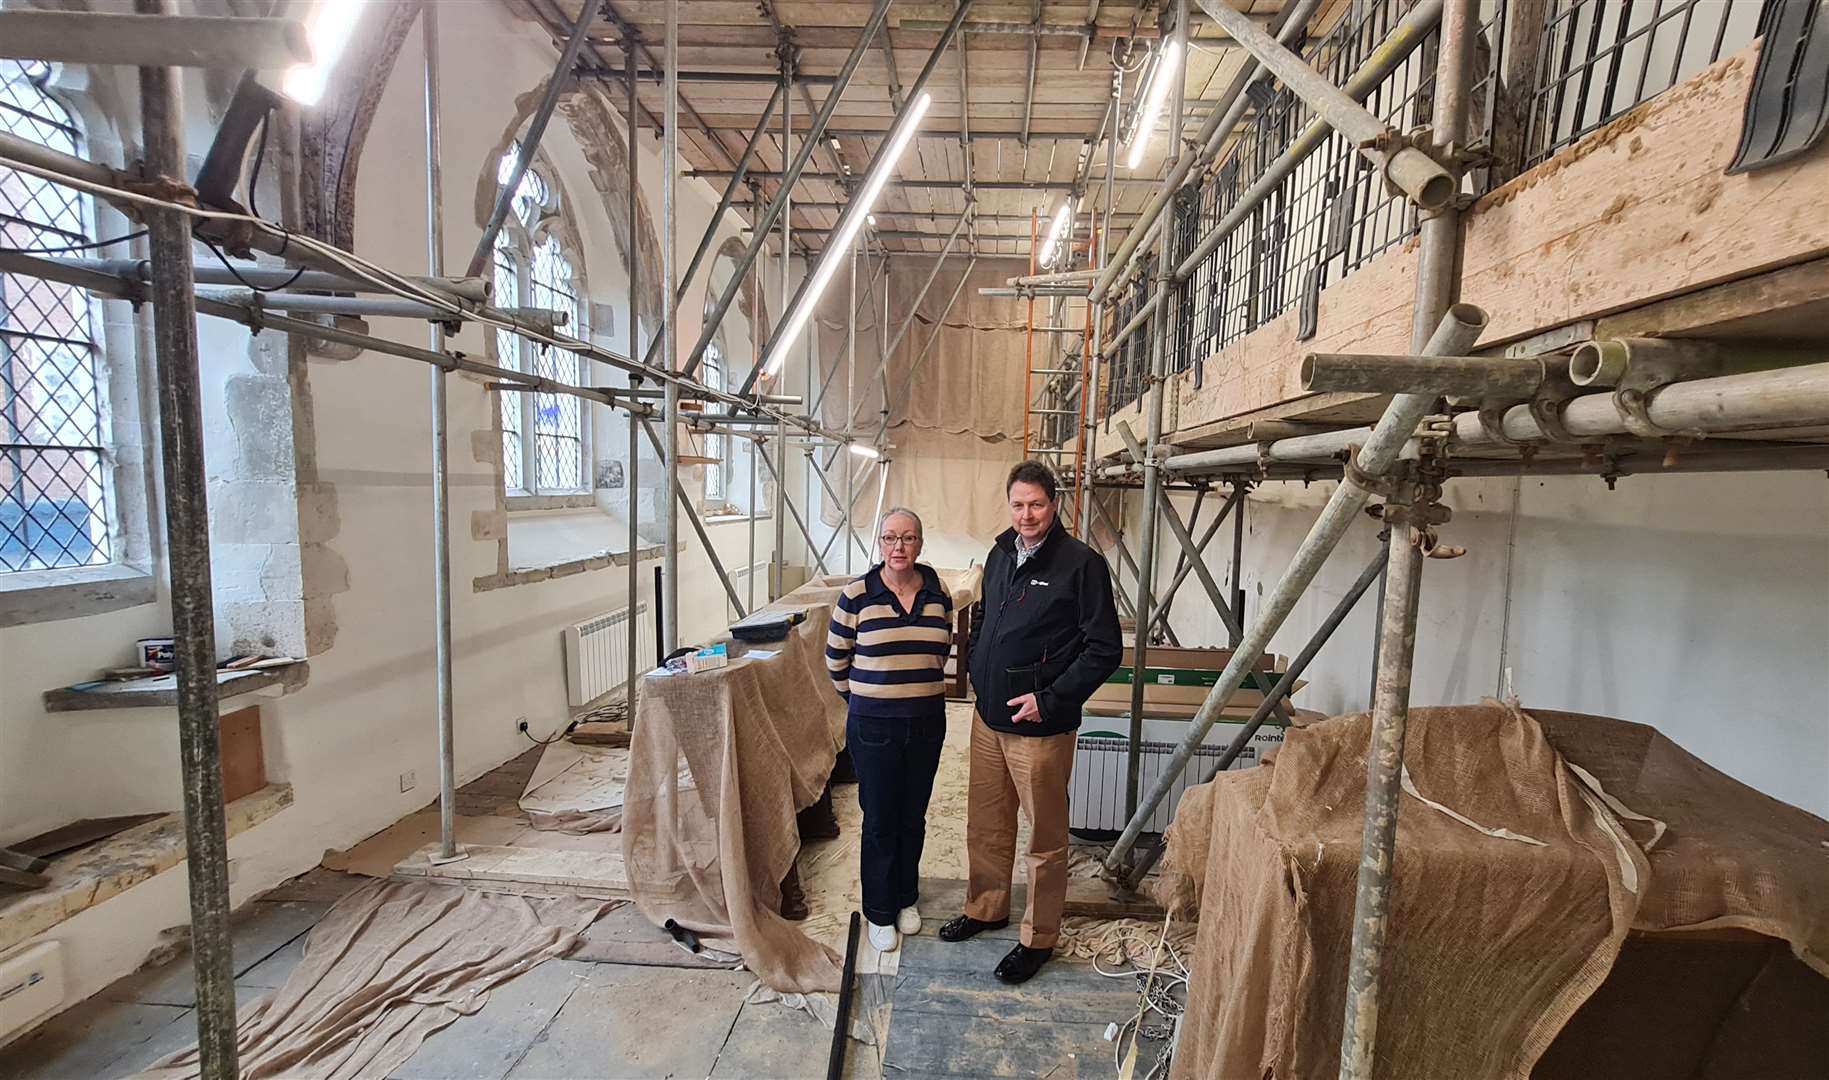 Eastbridge Hospital clerk and receiver Louise Knight with trustee Nick Rooke in the upper chapel which is undergoing restoration